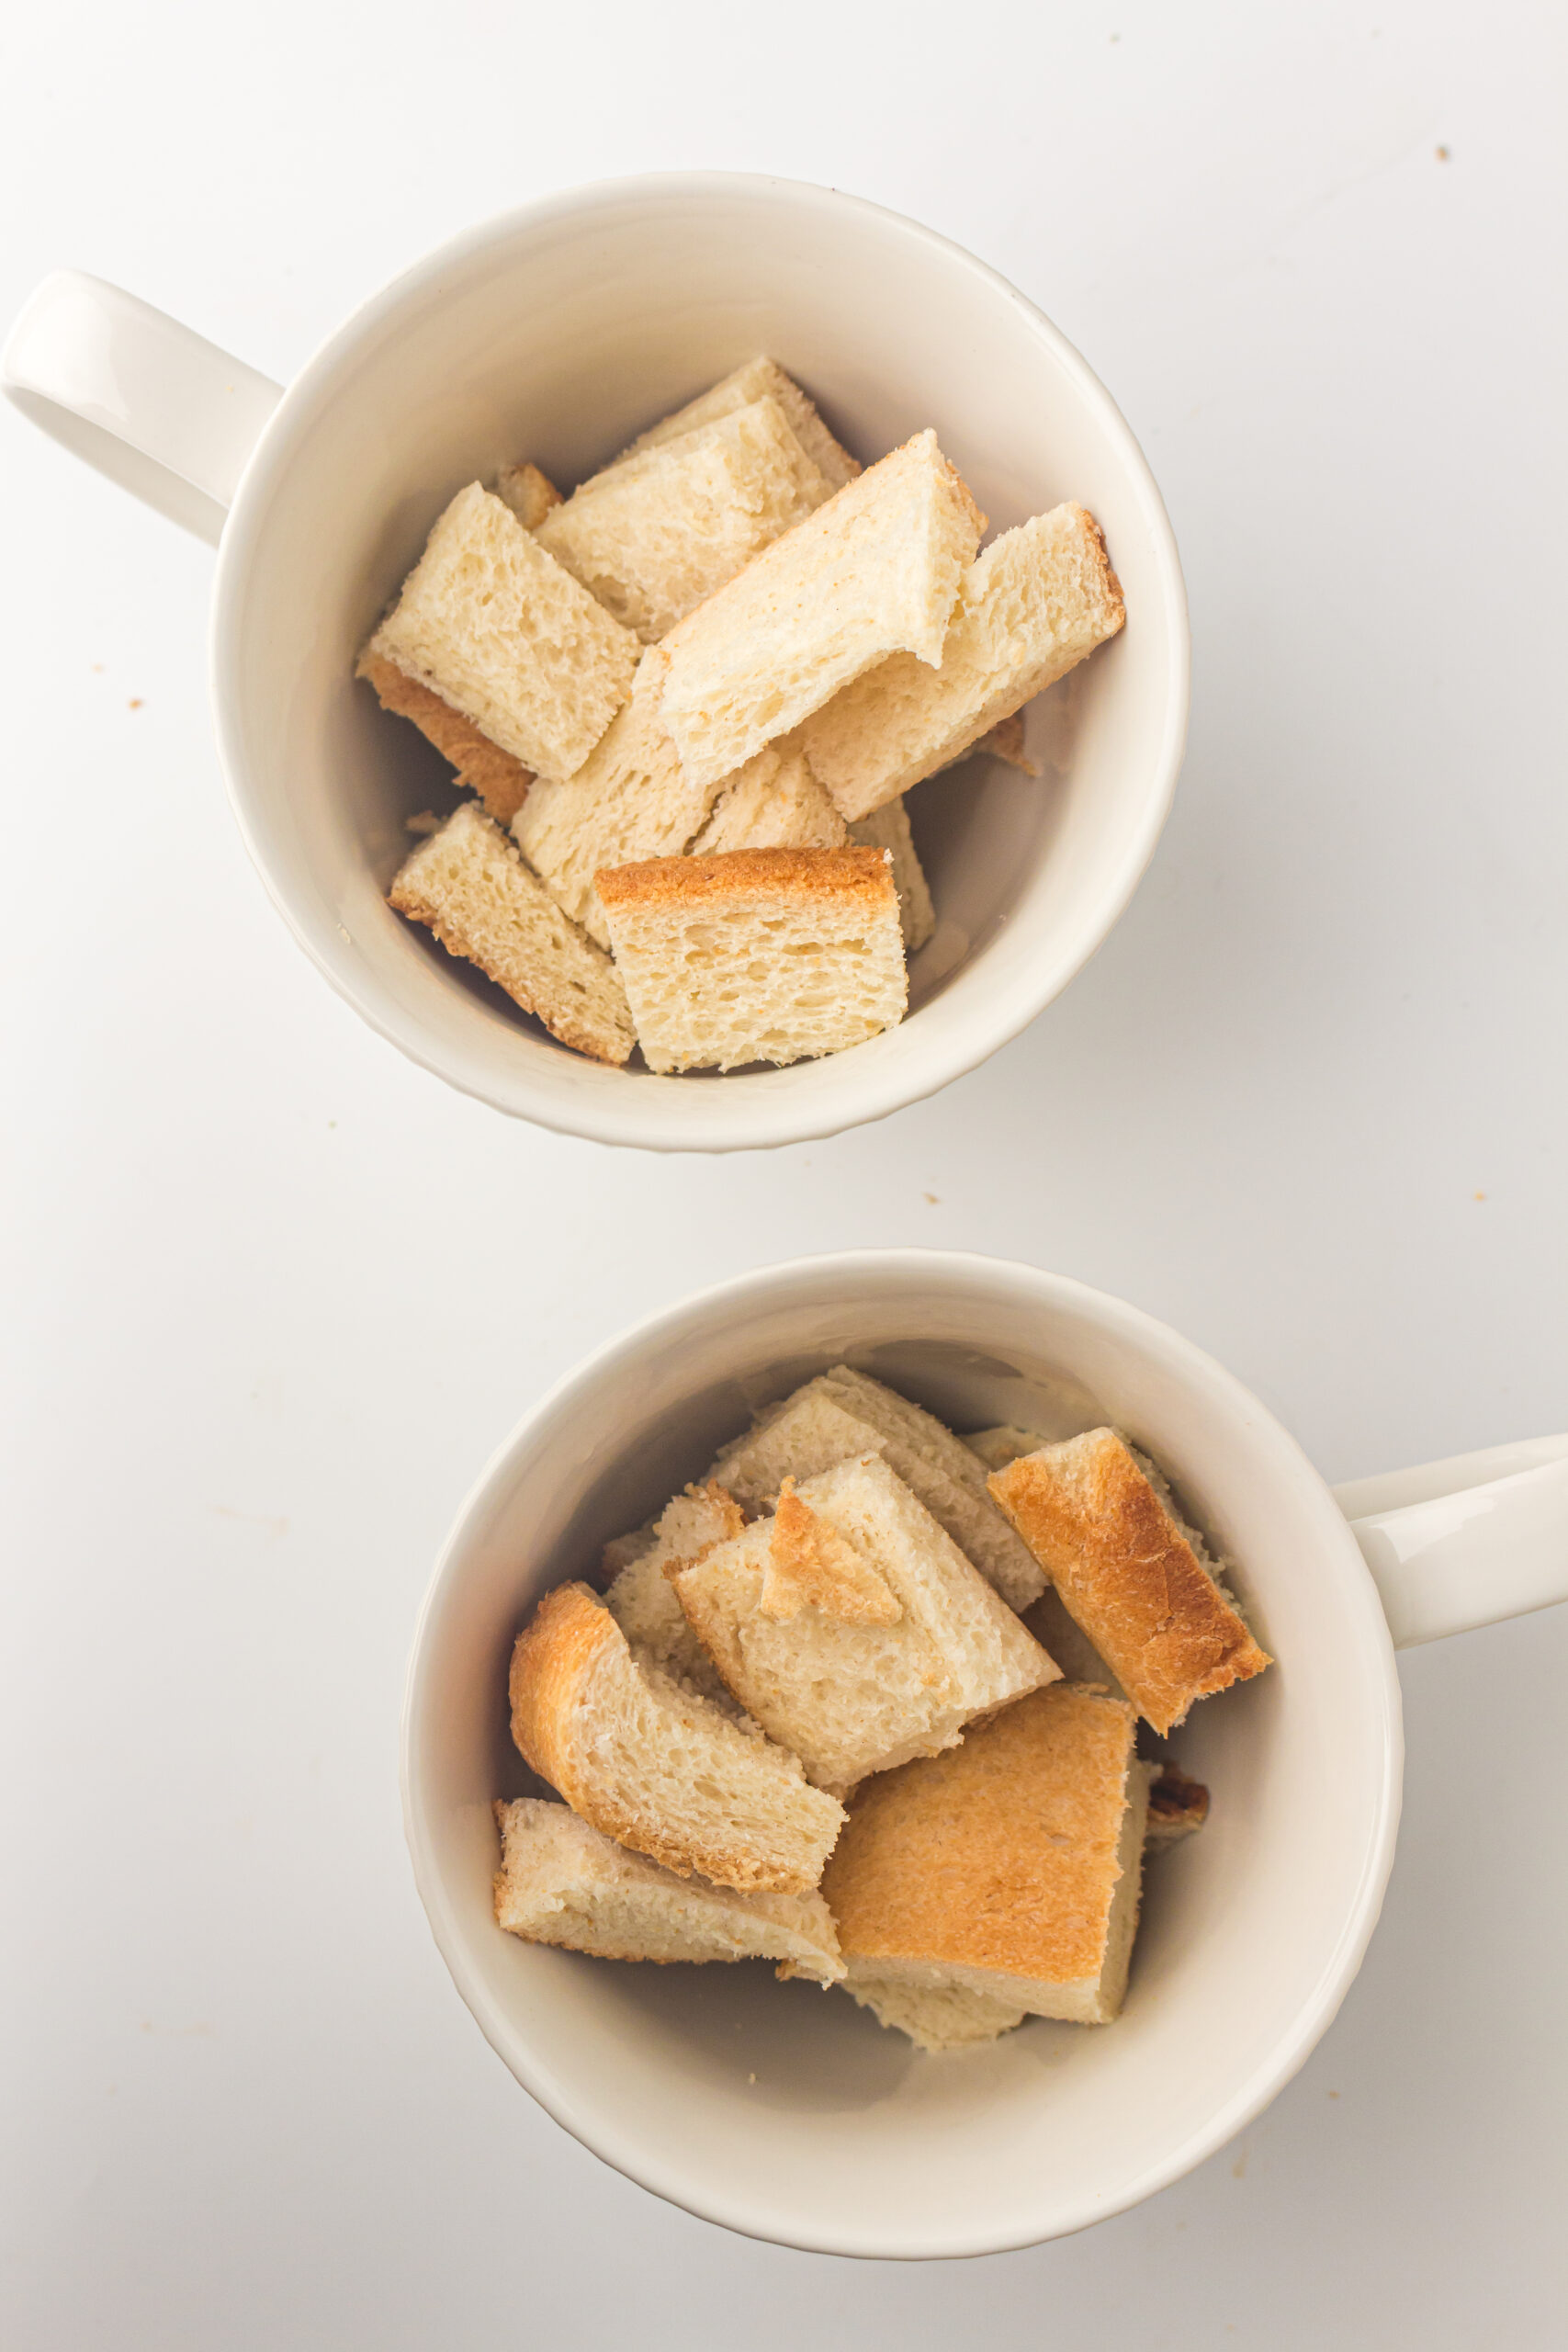 Cut up bread in a greased bowl